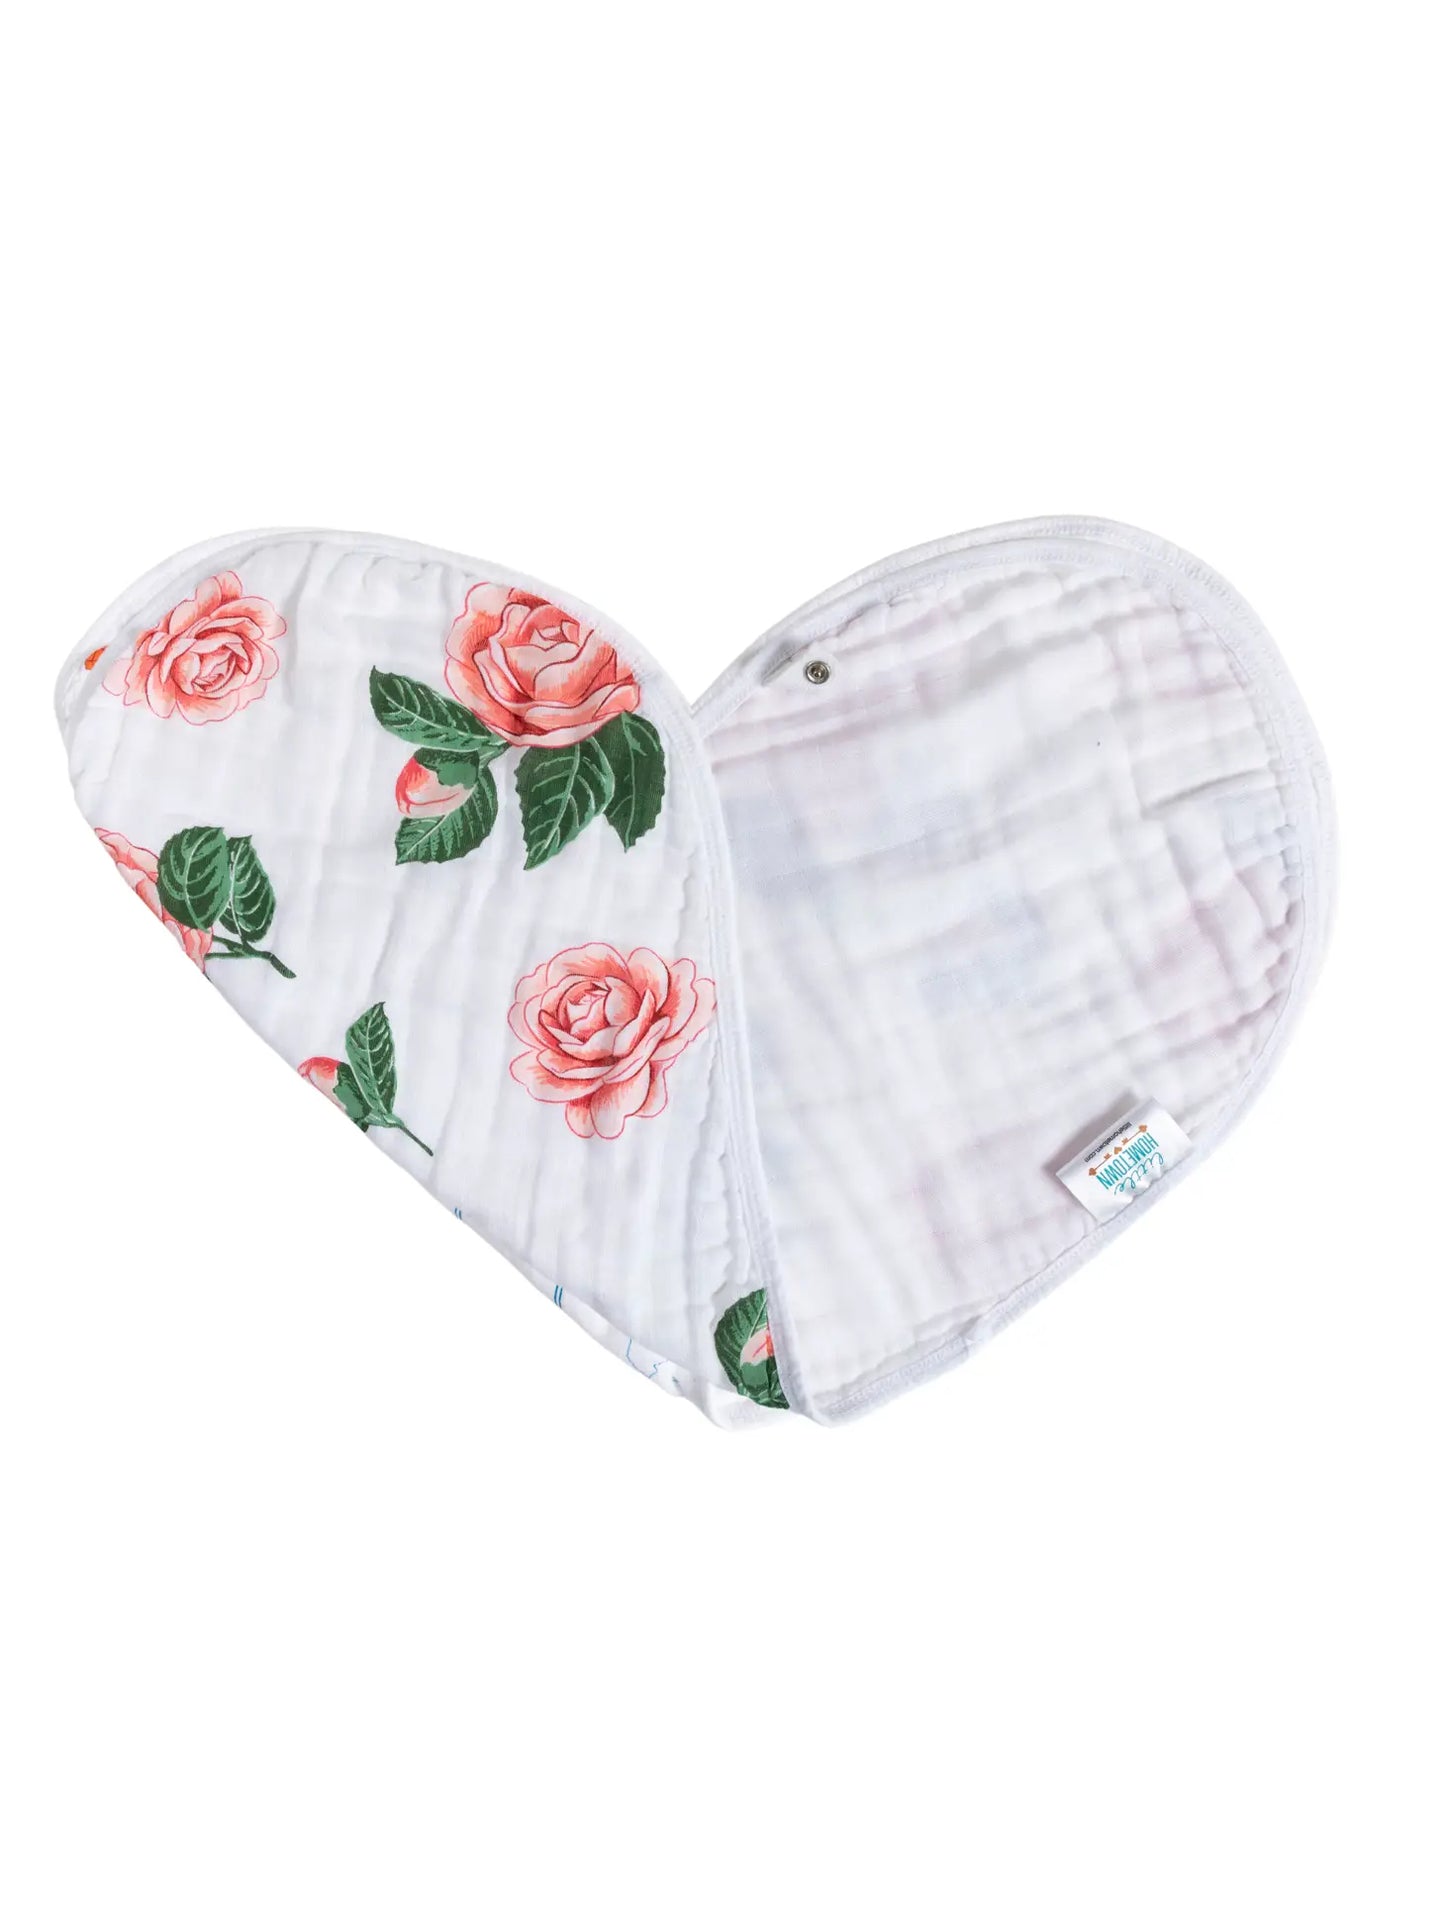 Camellia Baby 2-in-1 Burp Cloth And Bib (Floral)